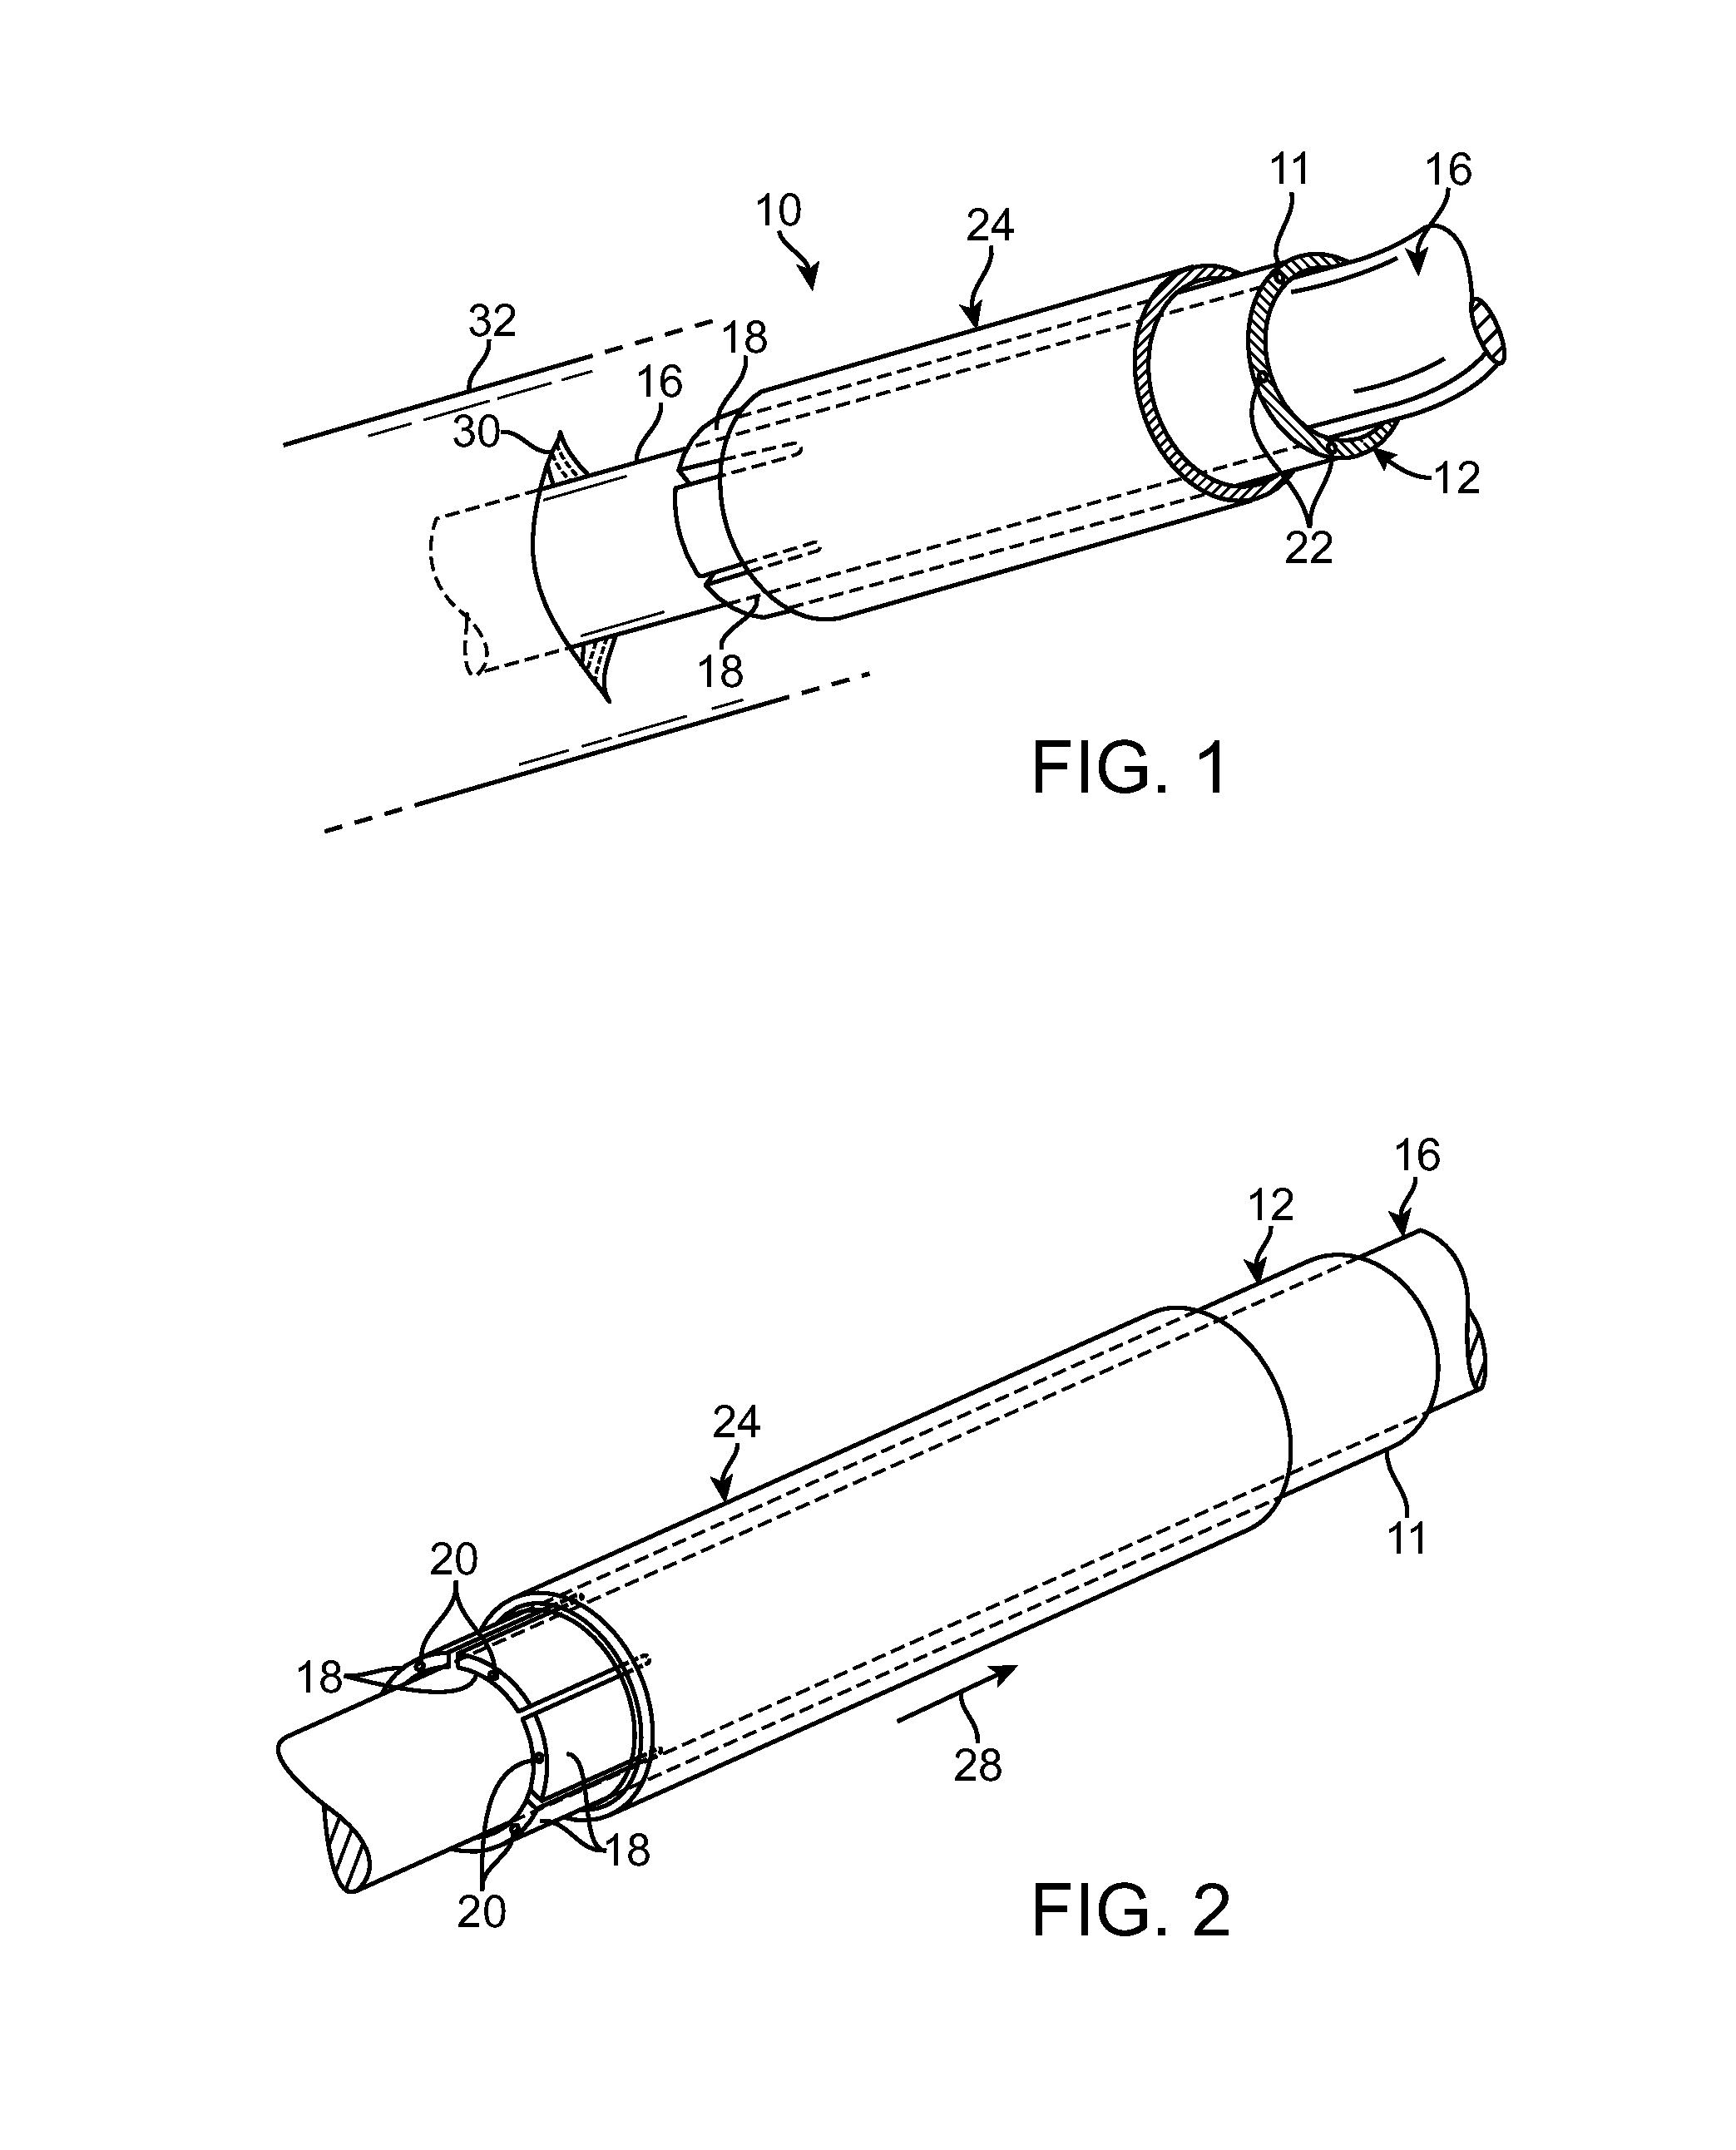 Mechanism and Method for Closing an Arteriotomy